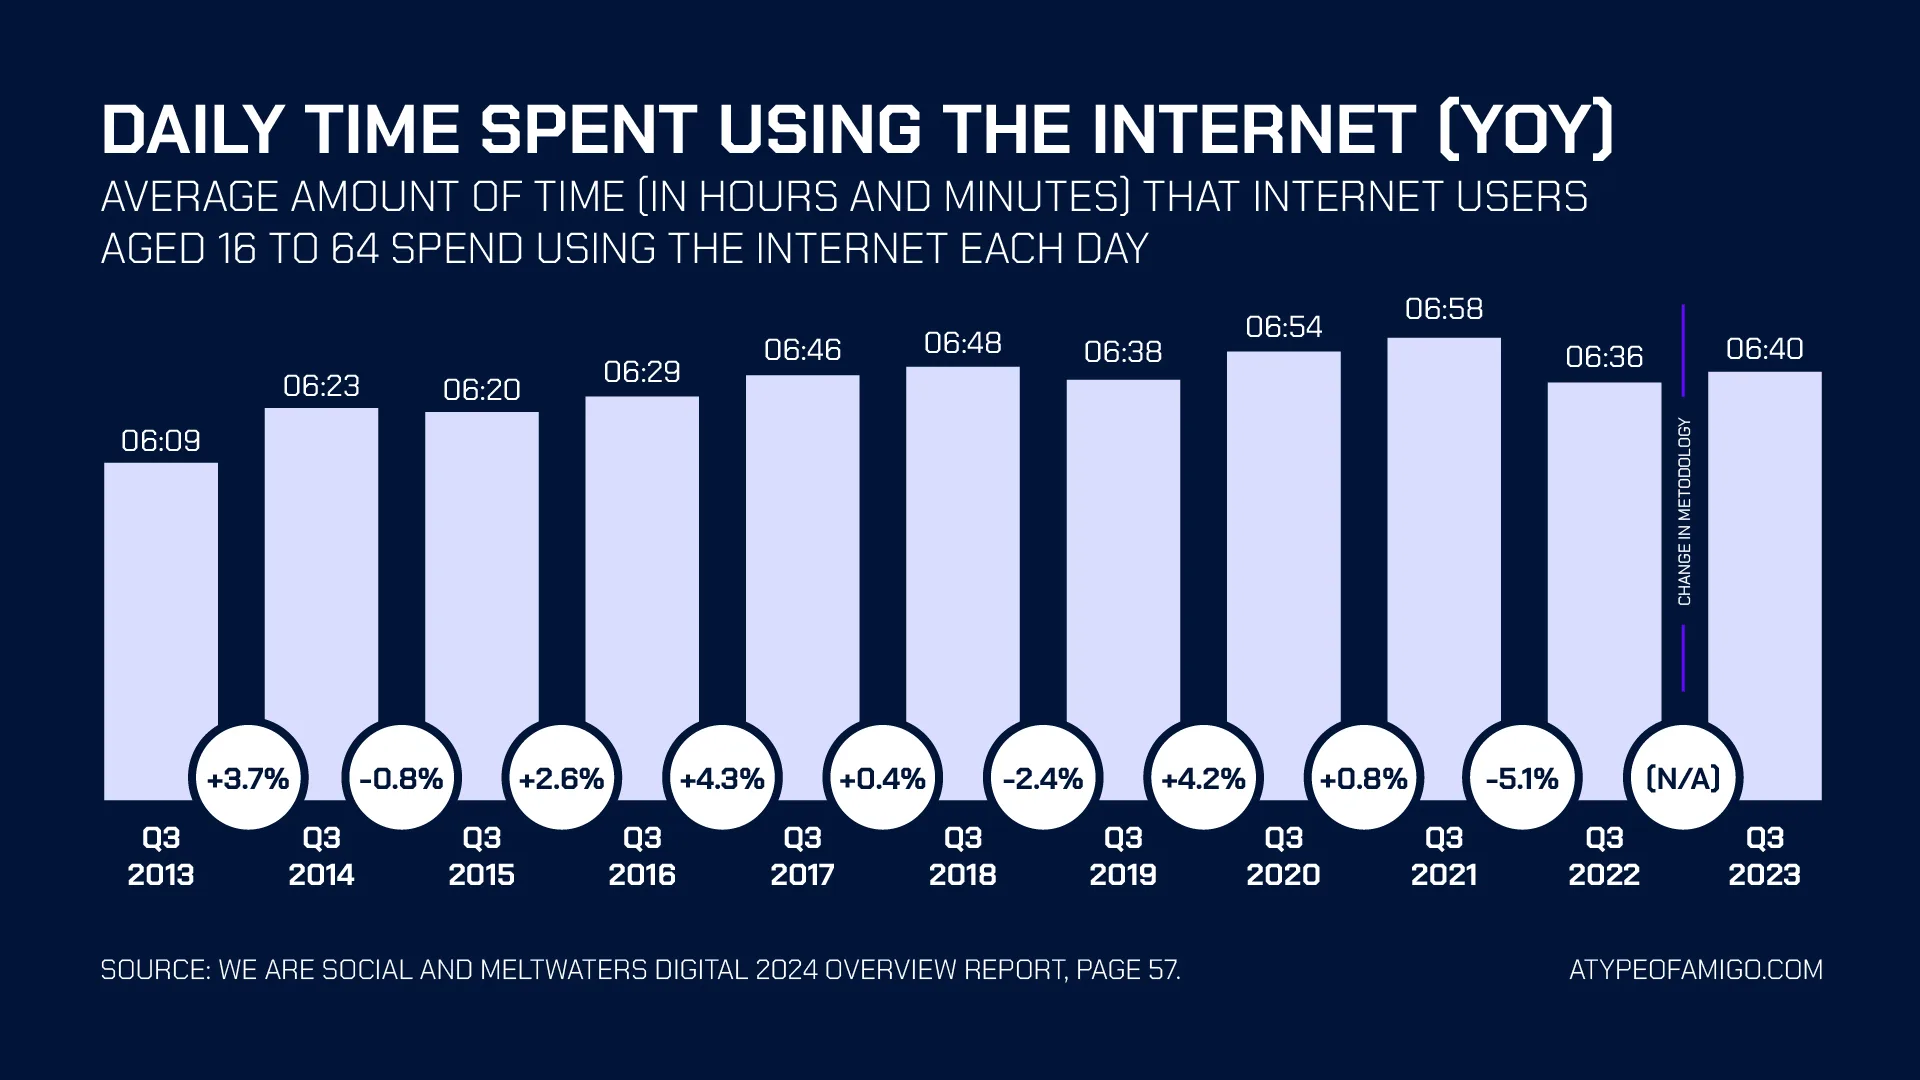 Daily time spent using the internet (YOY)